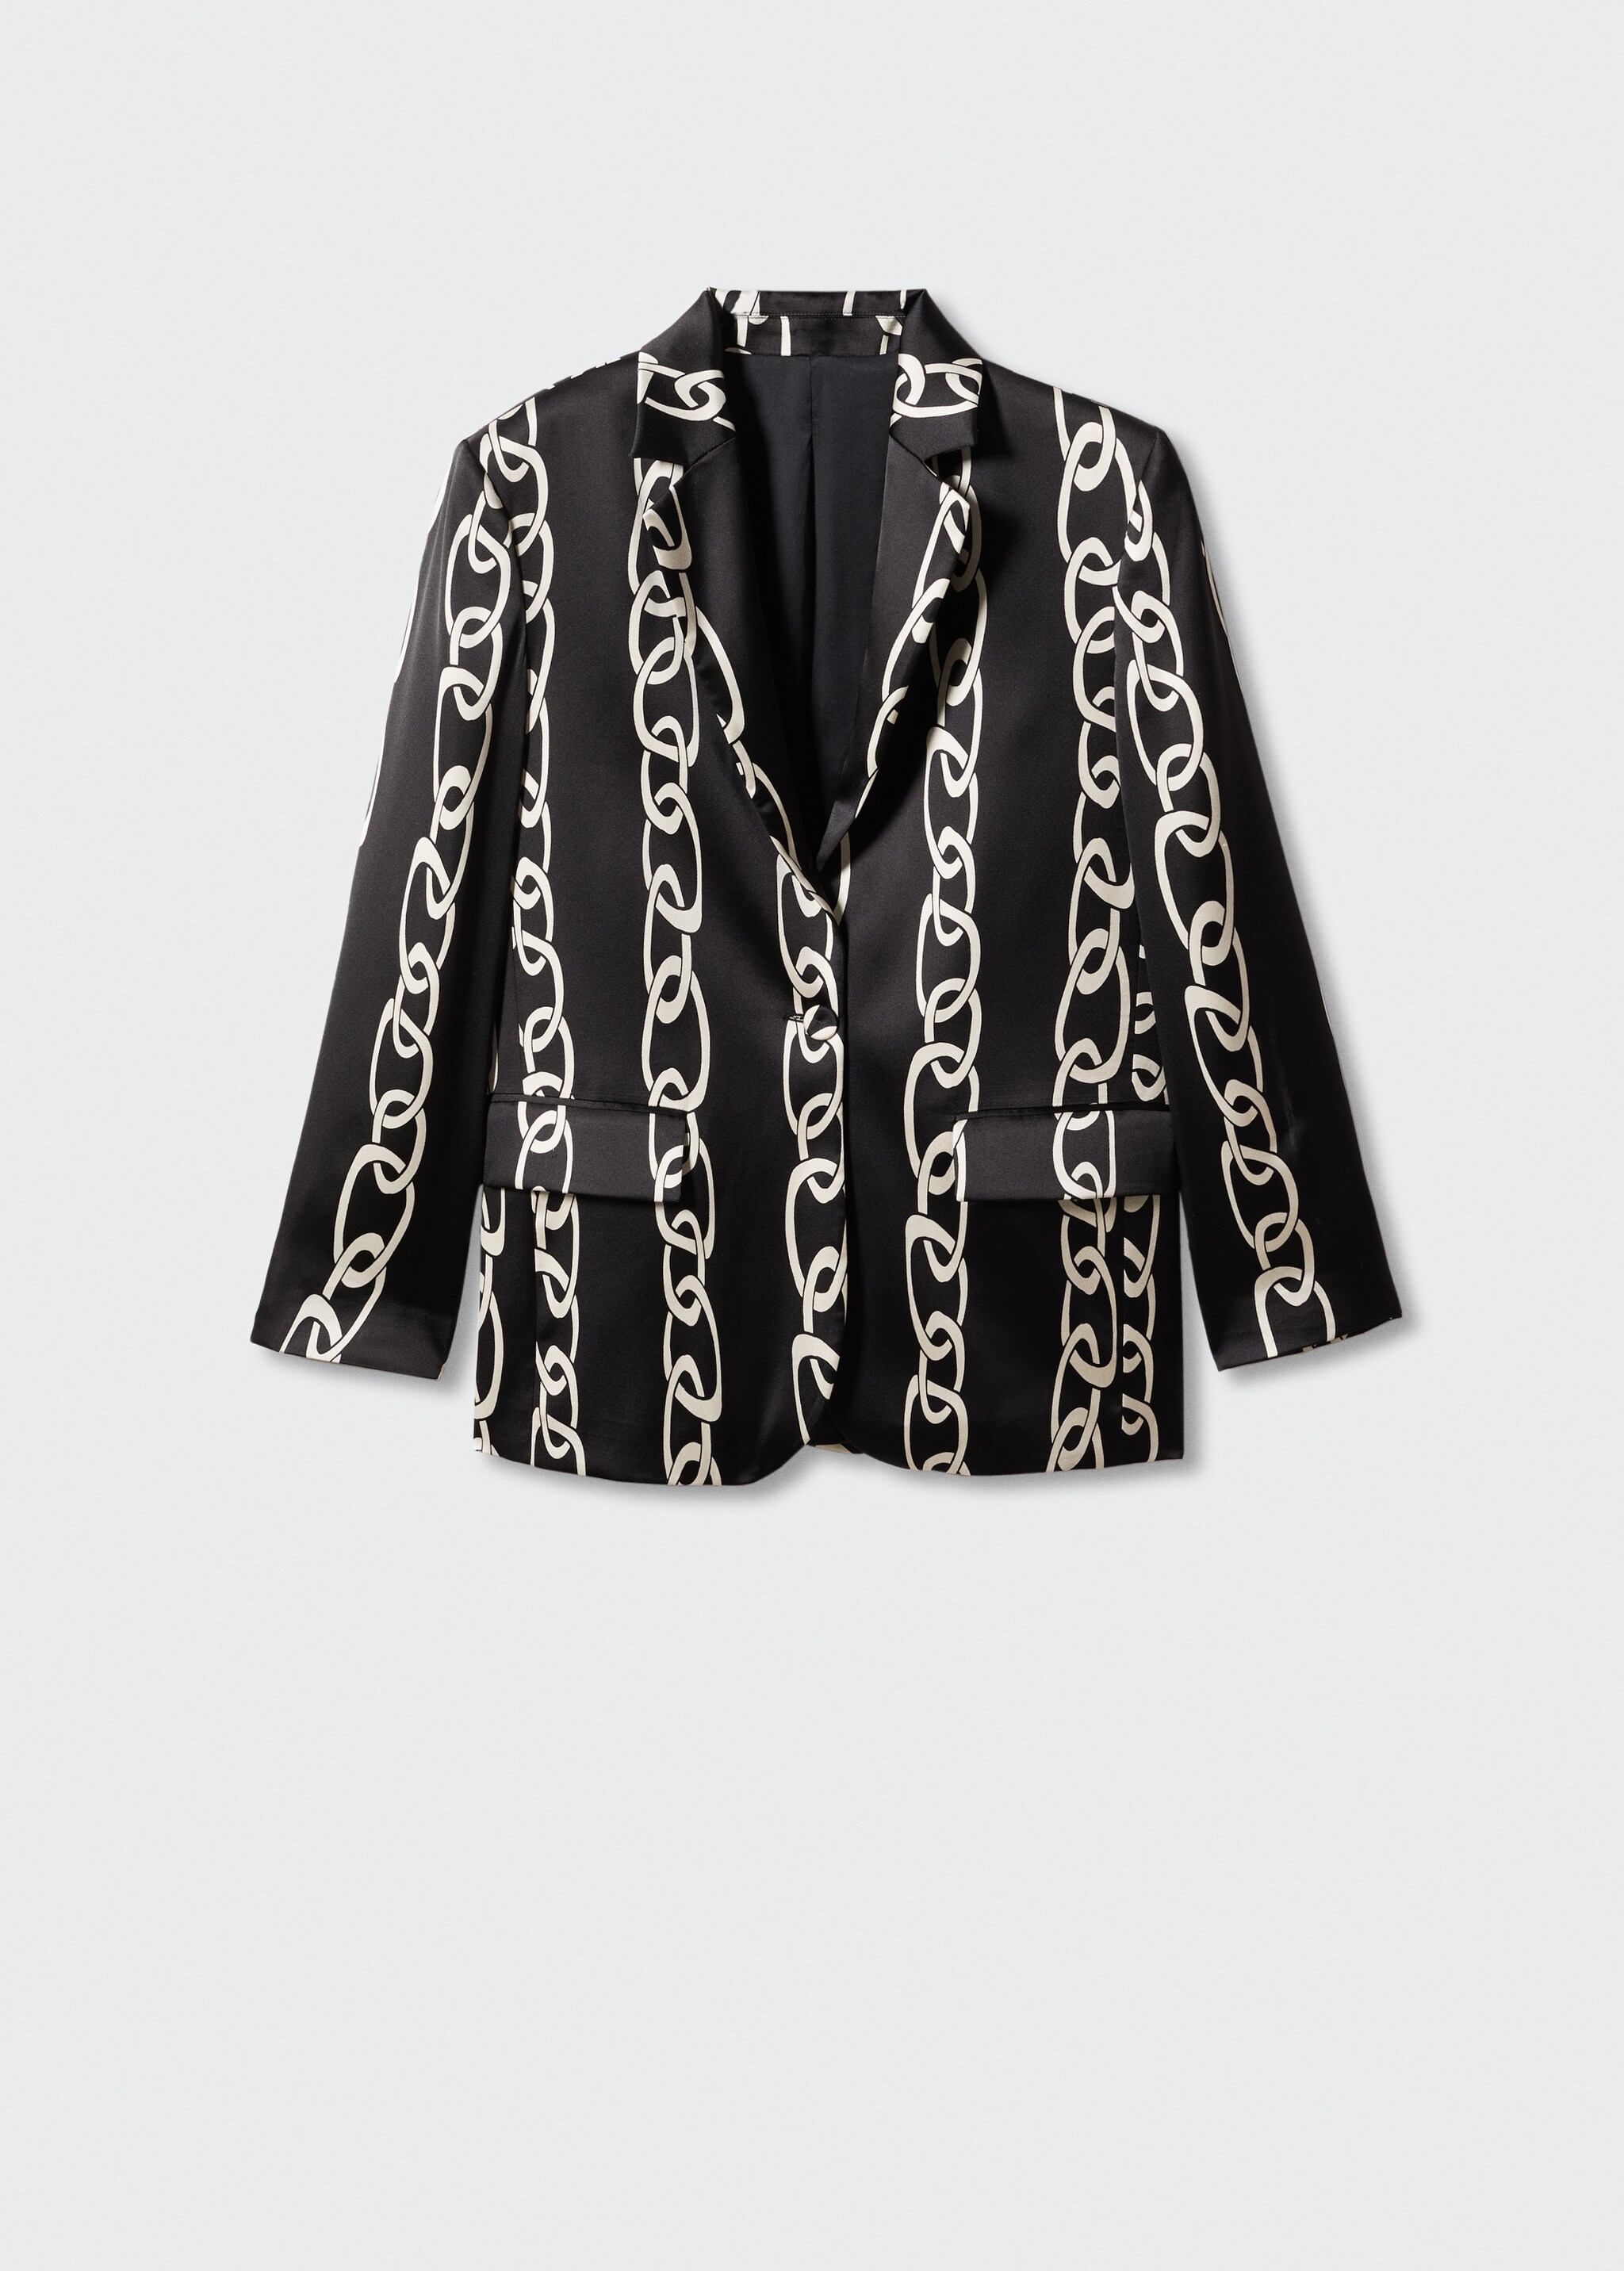 Chain print jacket - Article without model